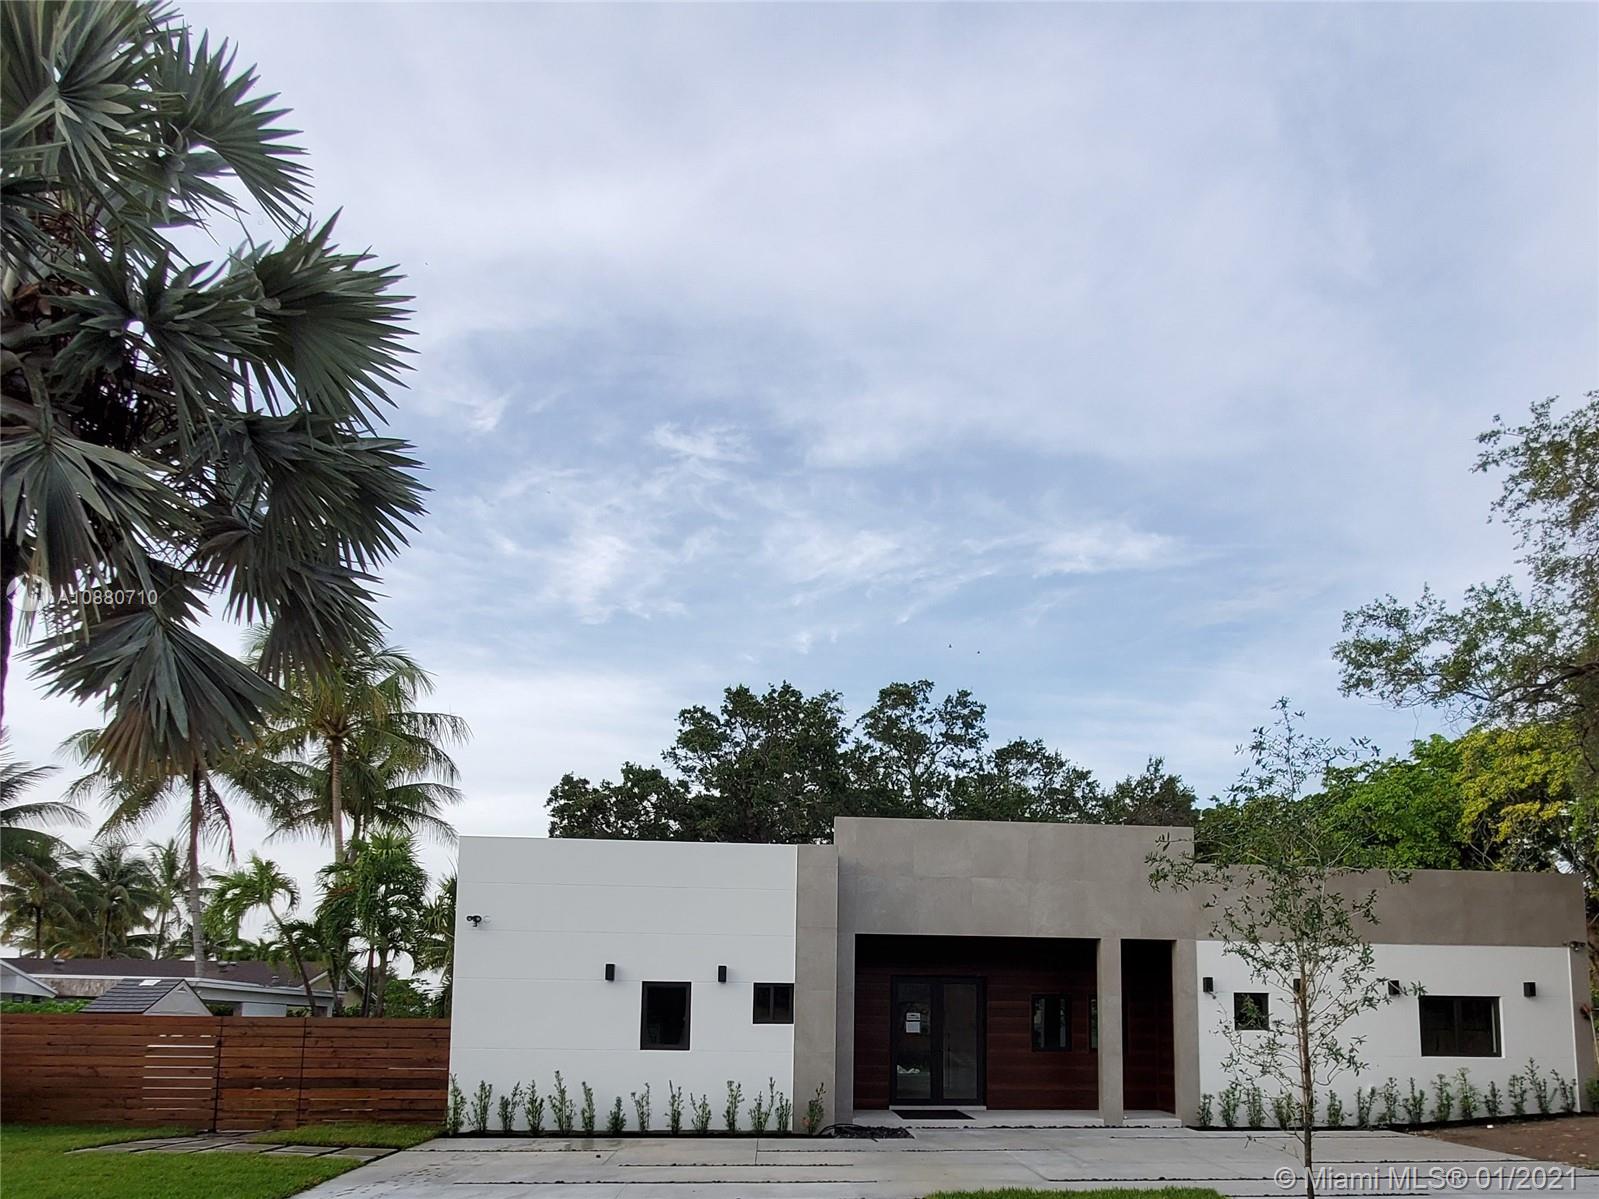 a view of house with palm tree in front of it